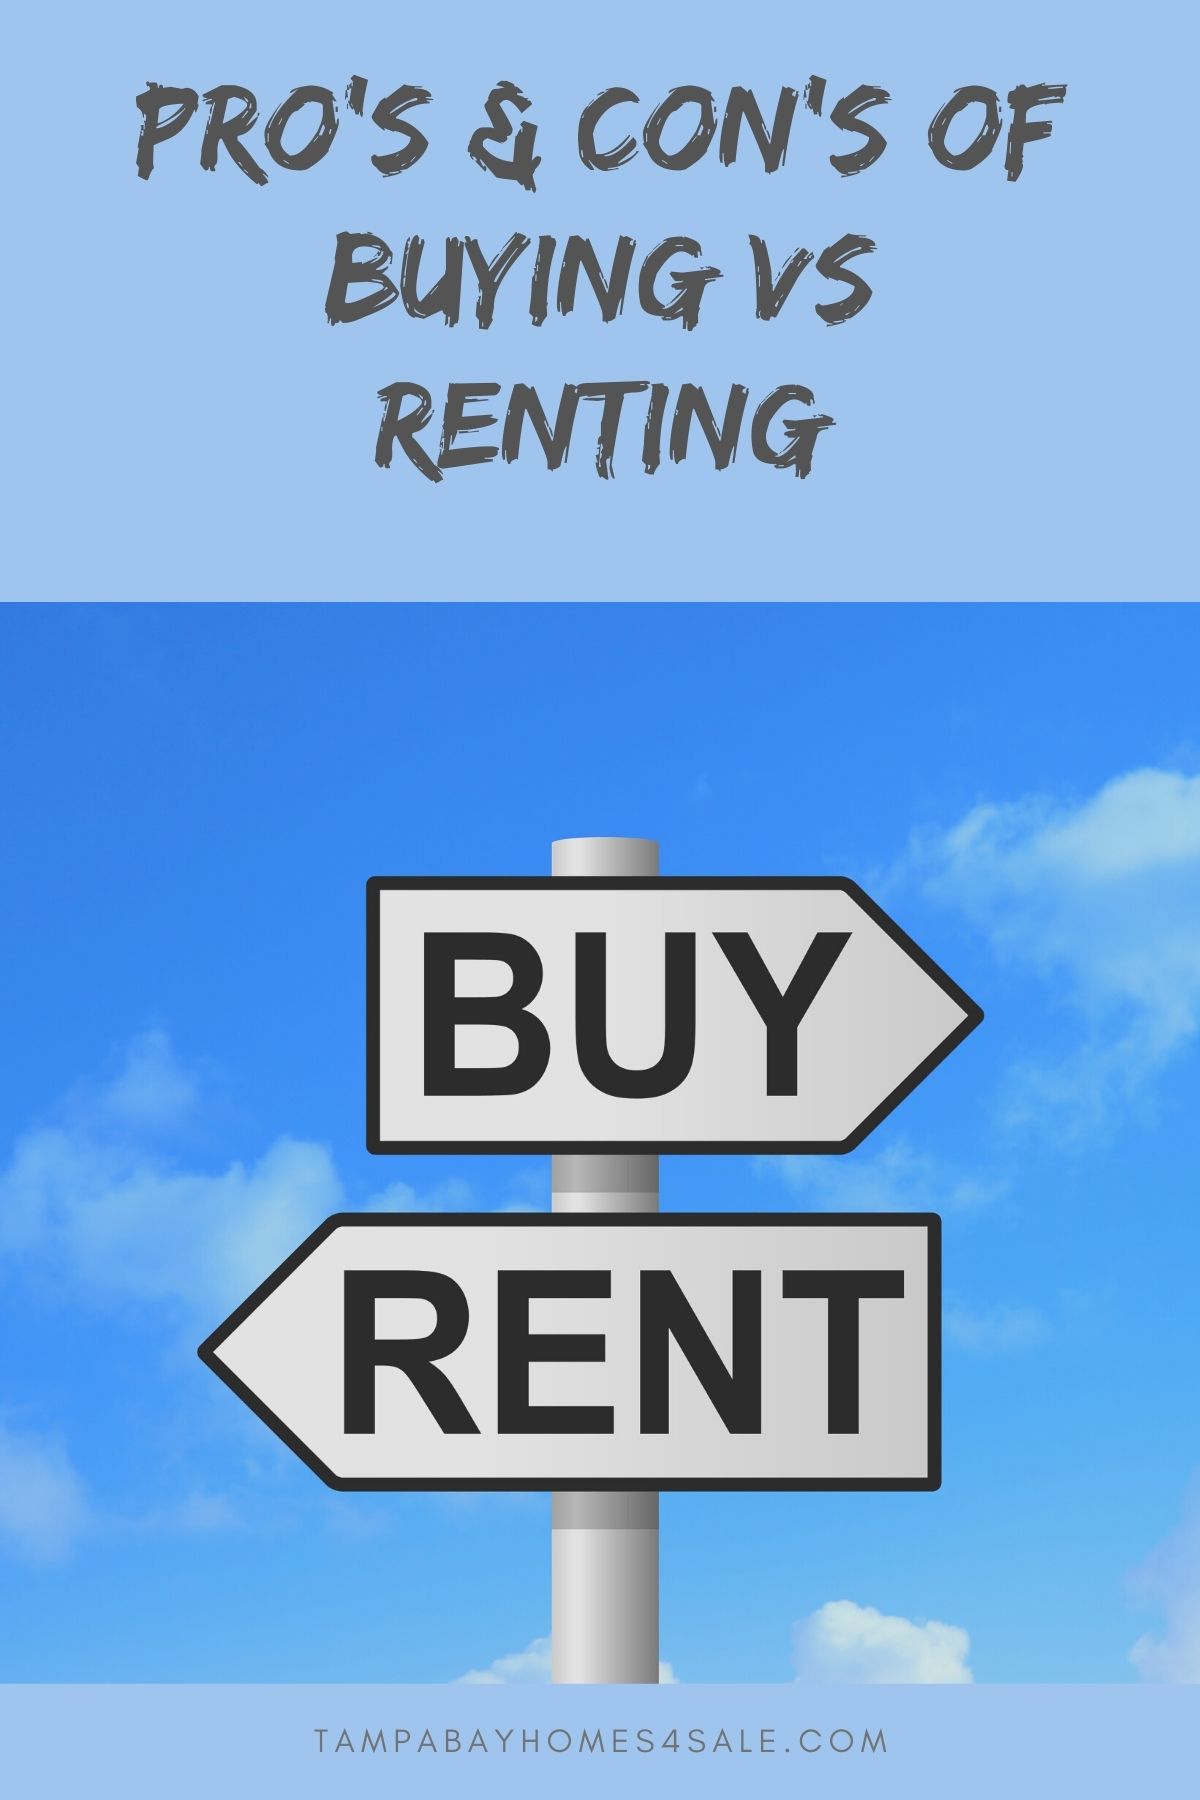 Pros Cons of Buying vs Renting